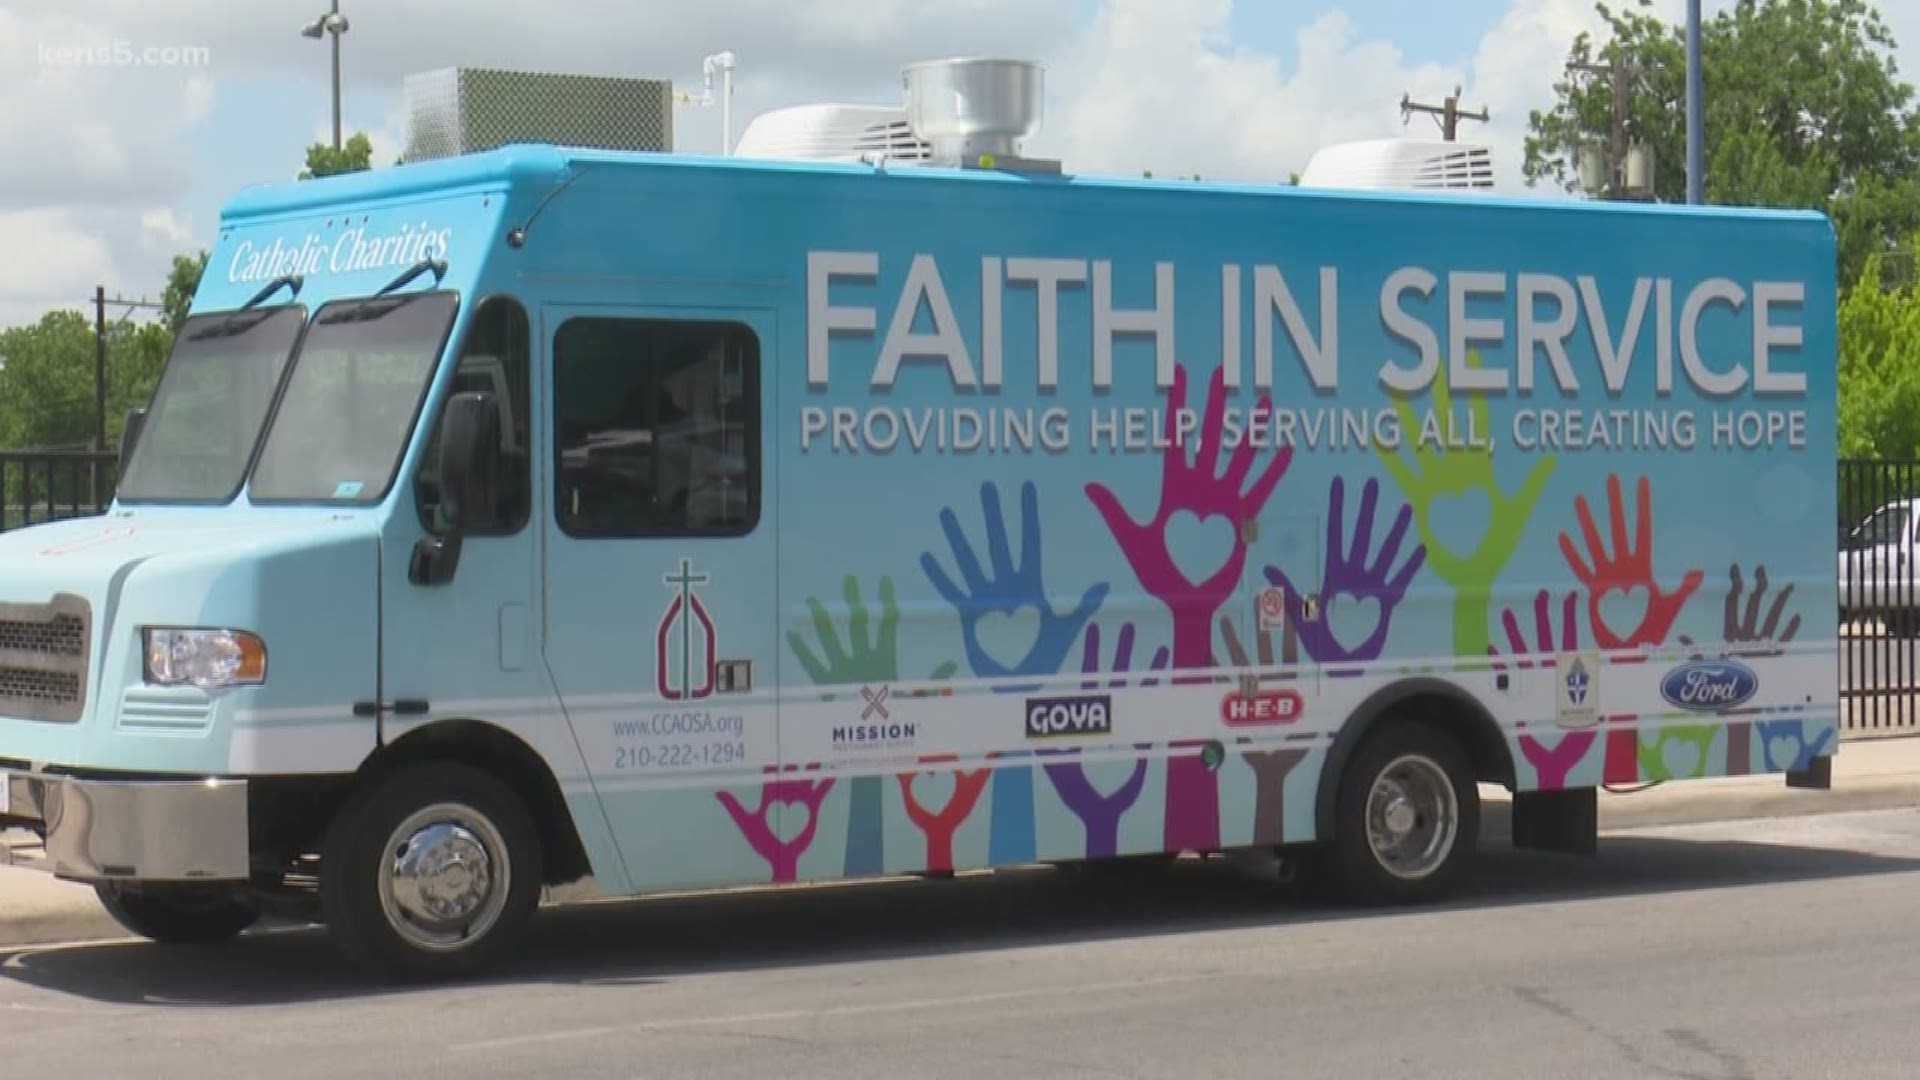 One group that immediately responded to the scene last night was Catholic Charities. As Eyewitness News reporter Sue Calberg found out, they showed up with an amazing new resource.